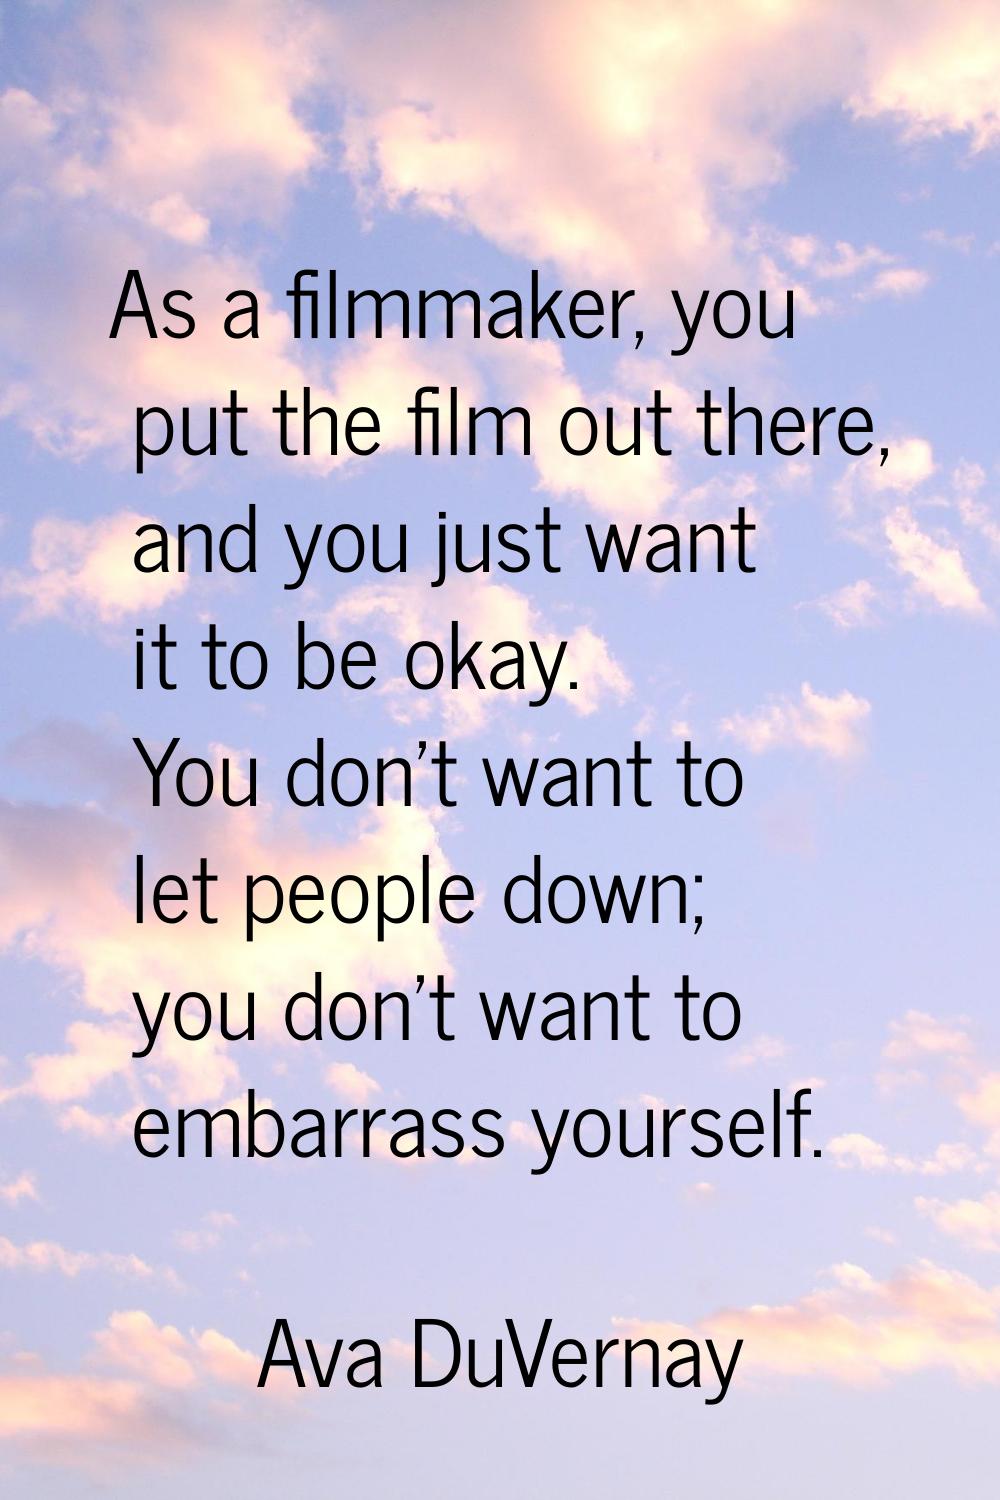 As a filmmaker, you put the film out there, and you just want it to be okay. You don't want to let 